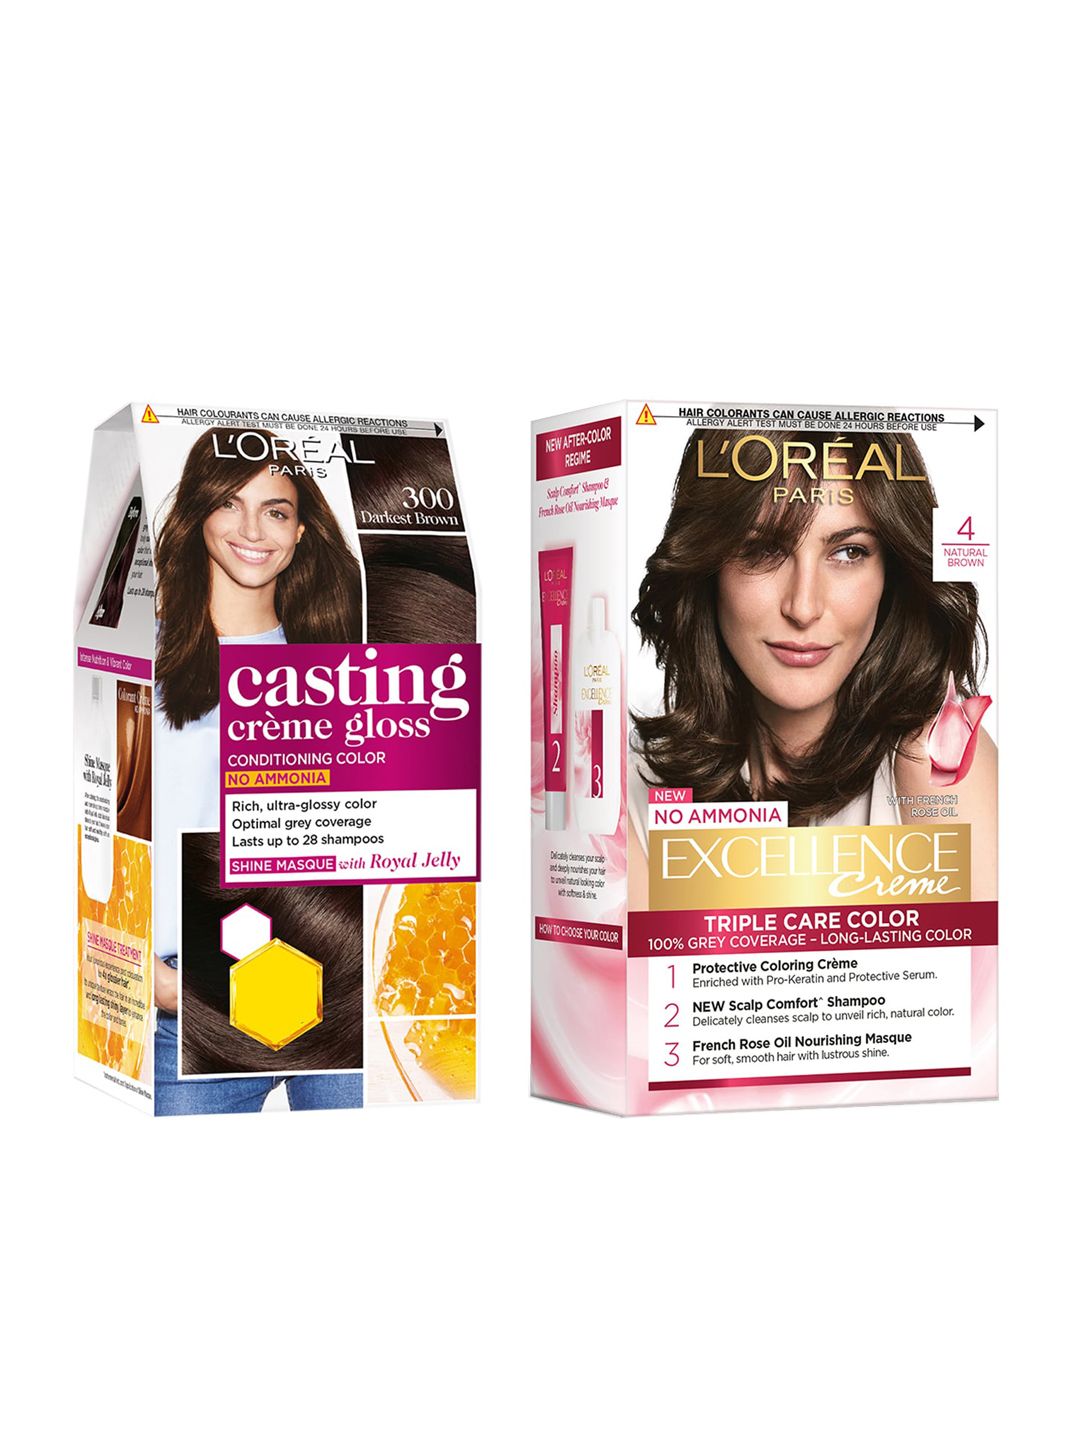 LOreal Paris Set of Casting Creme Gloss & Excellence Natural Hair Color Price in India